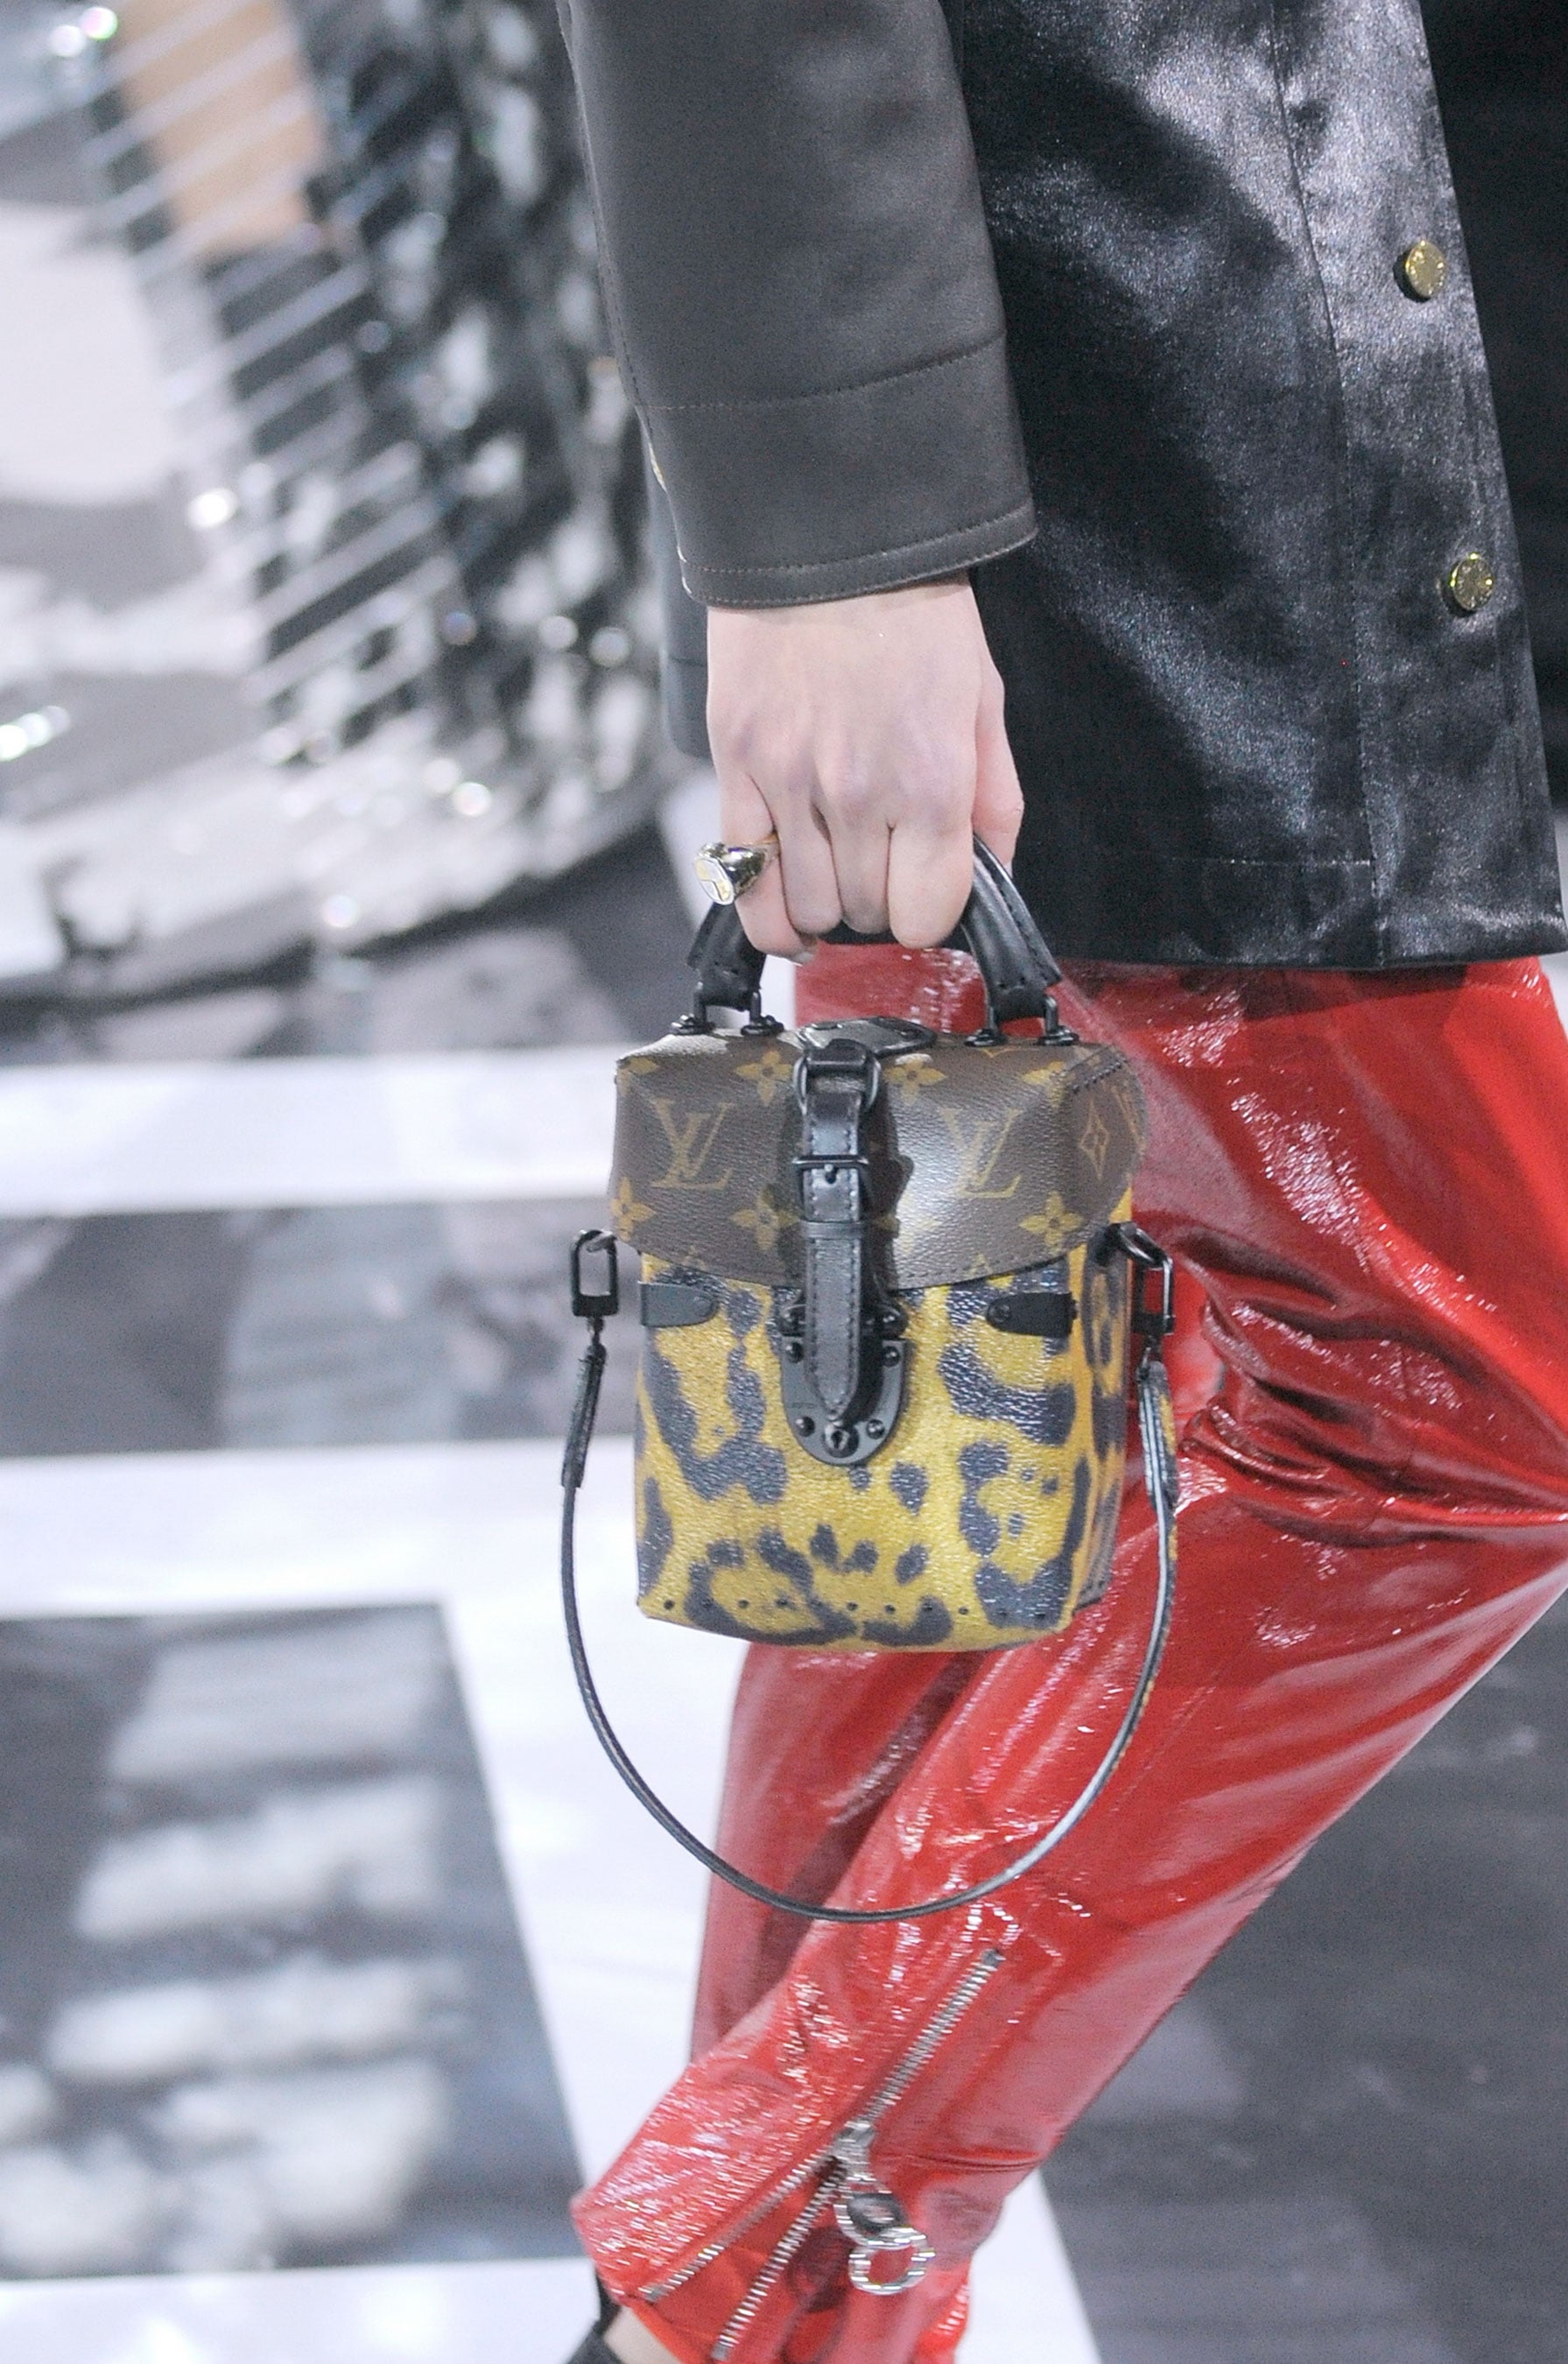 Fashion, & Style | The Bags and Shoes at Louis Vuitton Were a Technicolor | POPSUGAR Fashion Photo 2